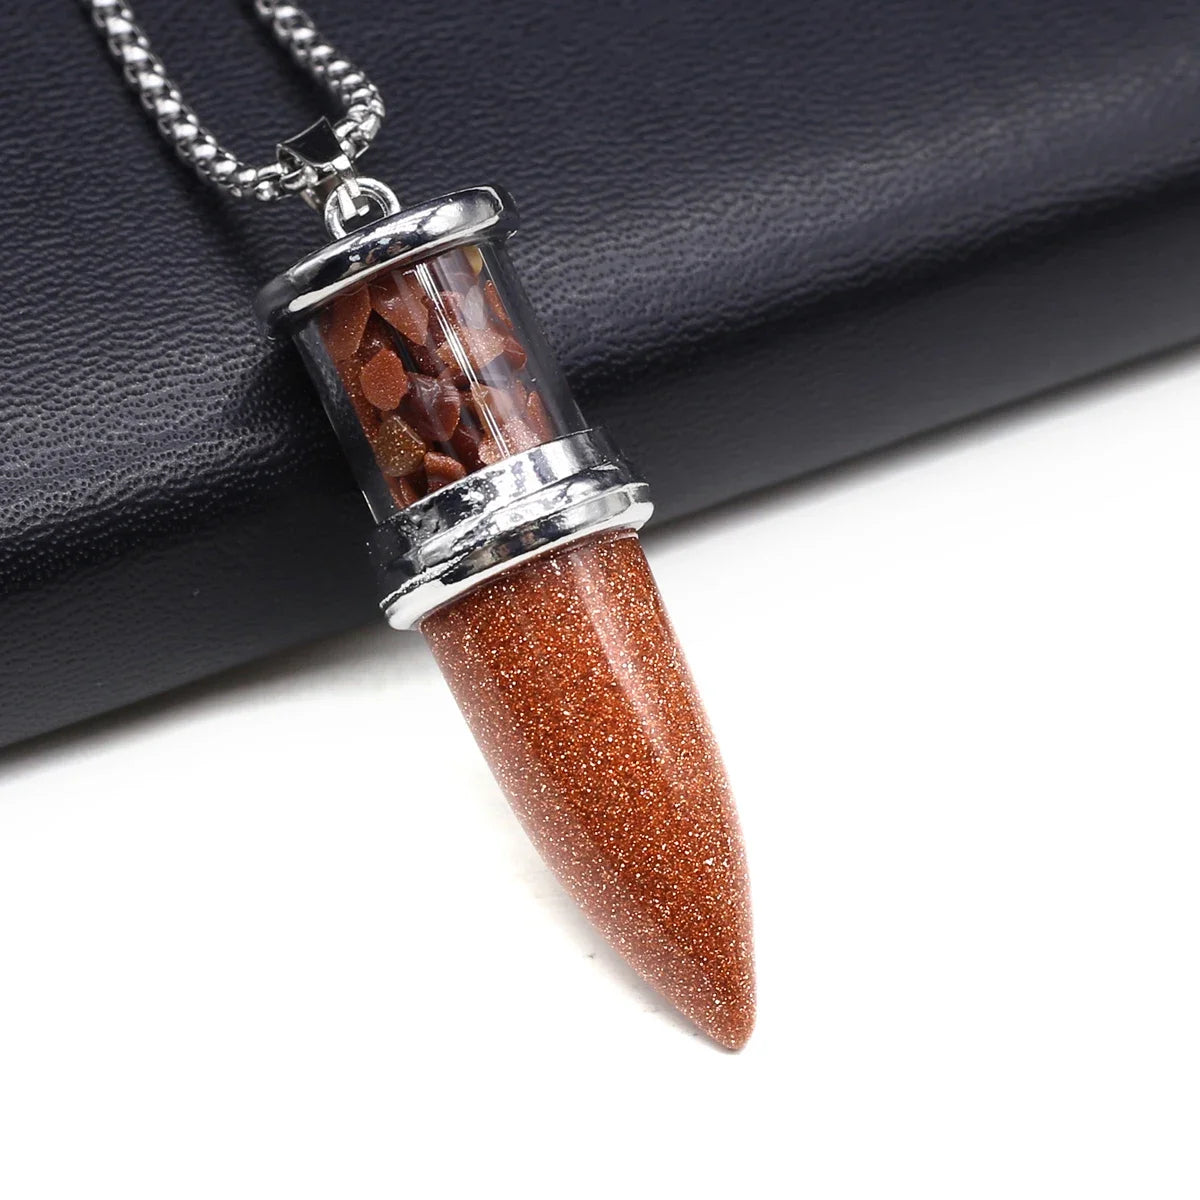 Bullet Shape Natural Stone Crystal Gravel Necklace Pendant - Gold Sand Stone - Cosmic Serenity Shop